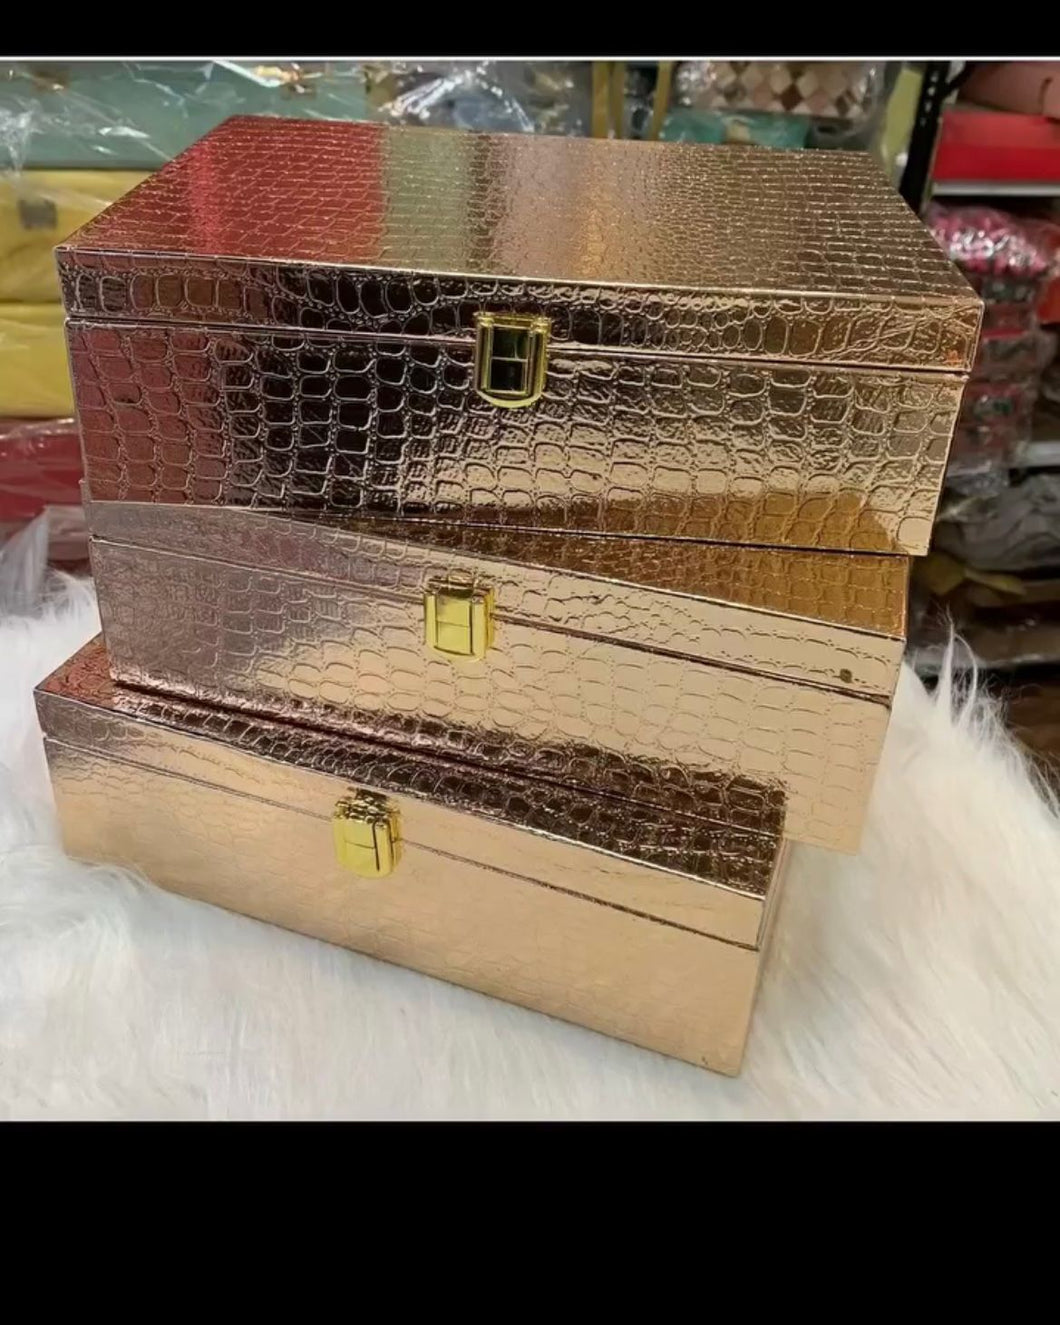 Crocodile print leather boxes for corporate gifting